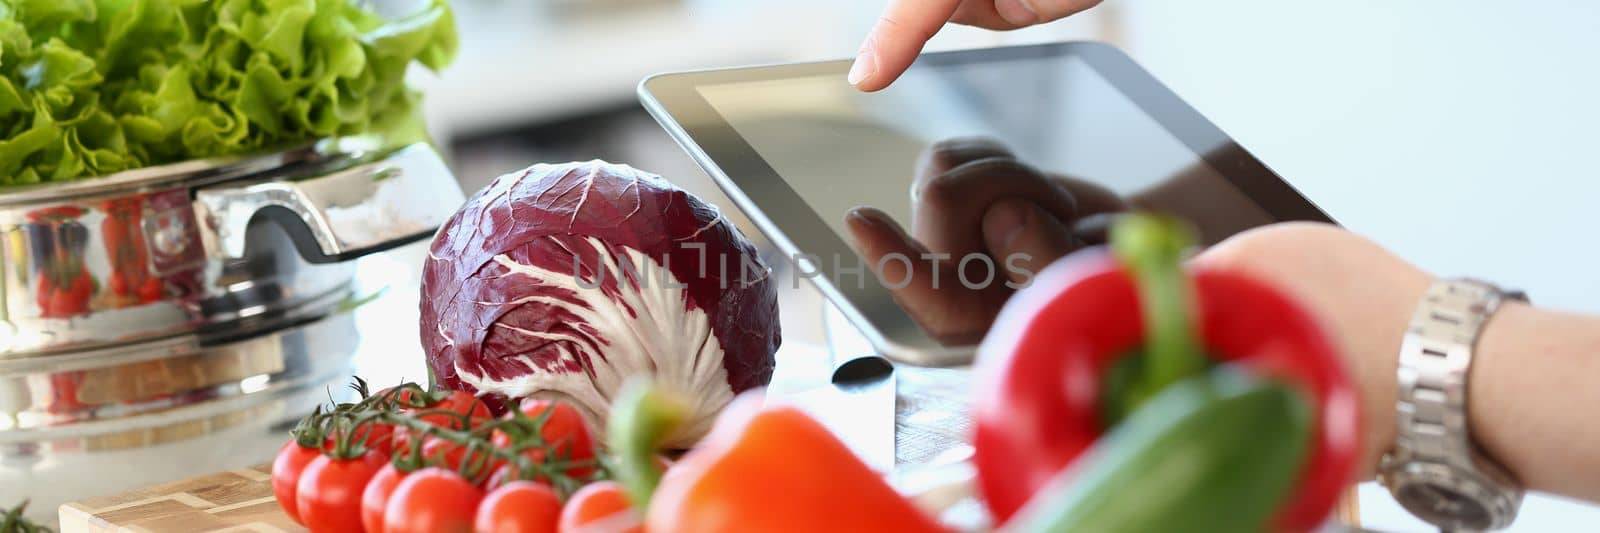 Person holding digital tablet and fresh vegetables in kitchen. Online application for shopping or food recipes and organic farm products